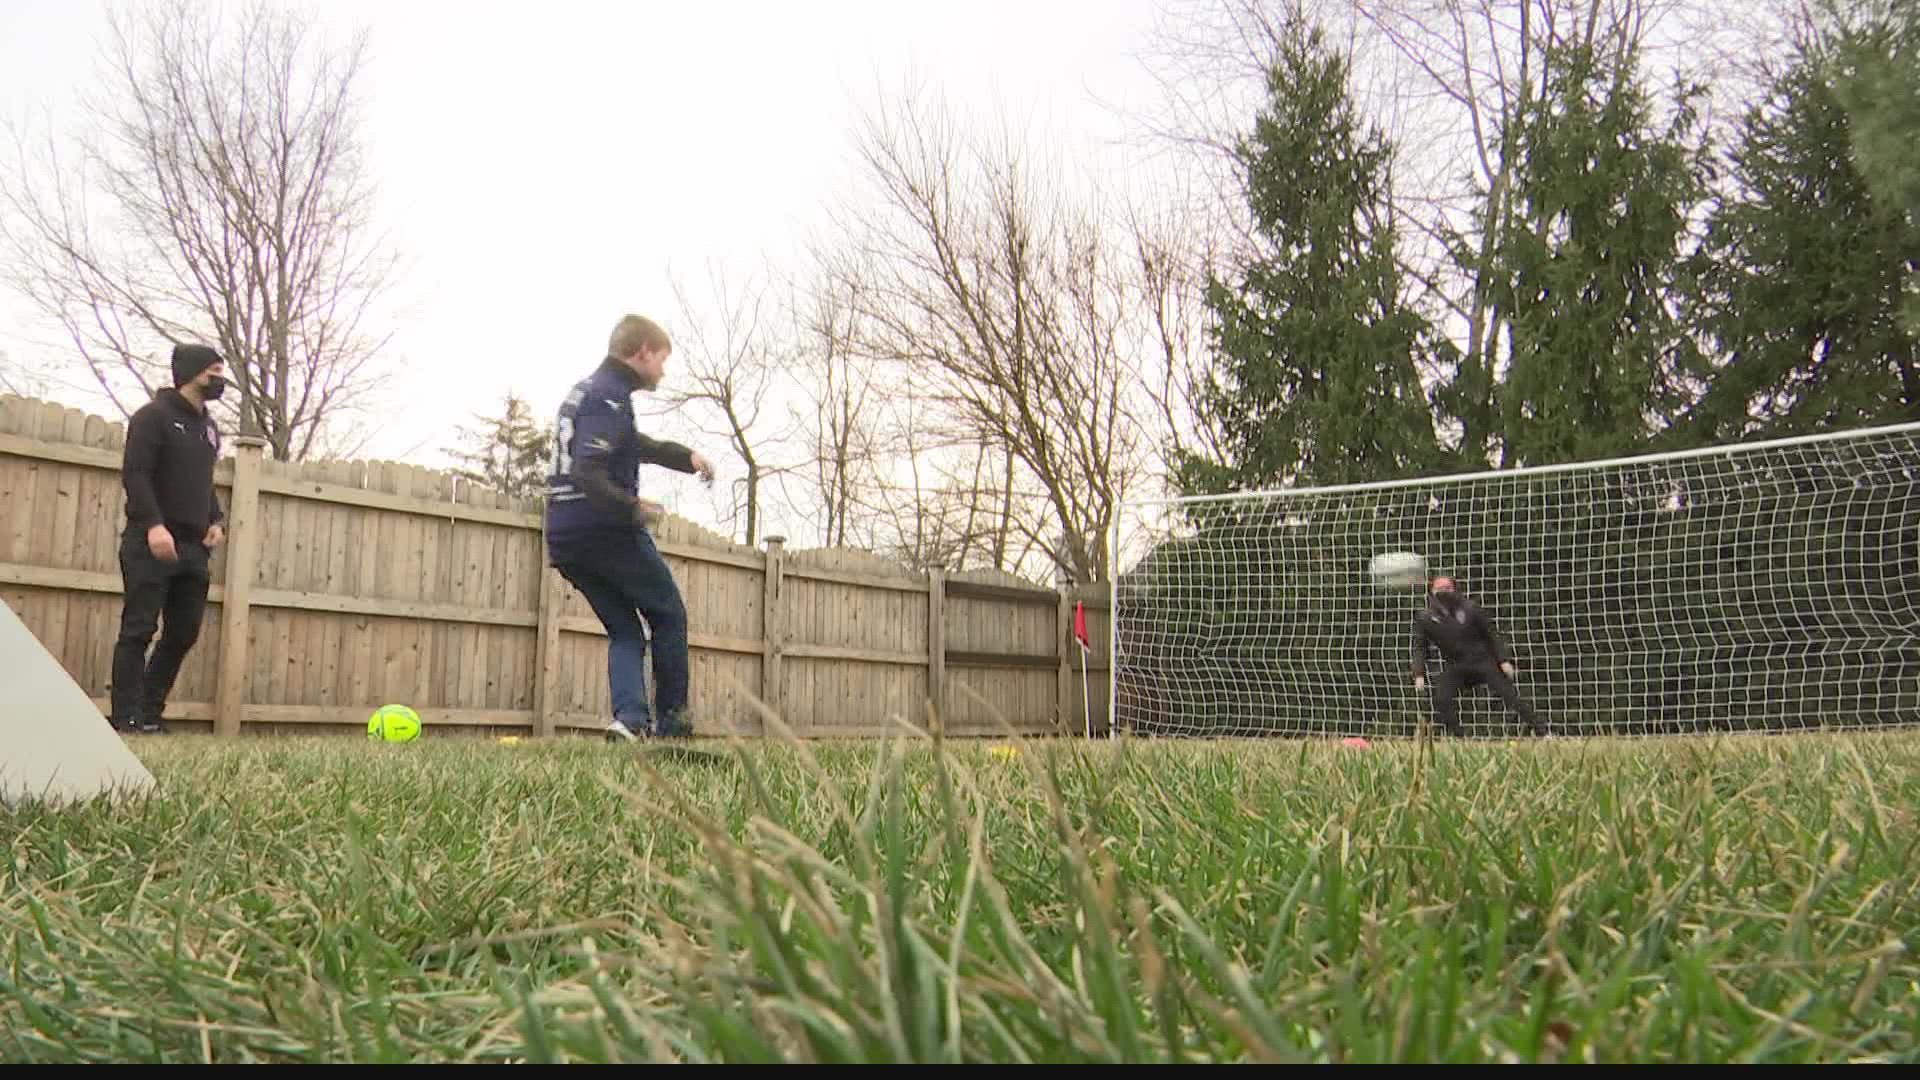 Indy Eleven and Make-A-Wish teamed up with the community to build a soccer field in Levi Kelley's backyard.